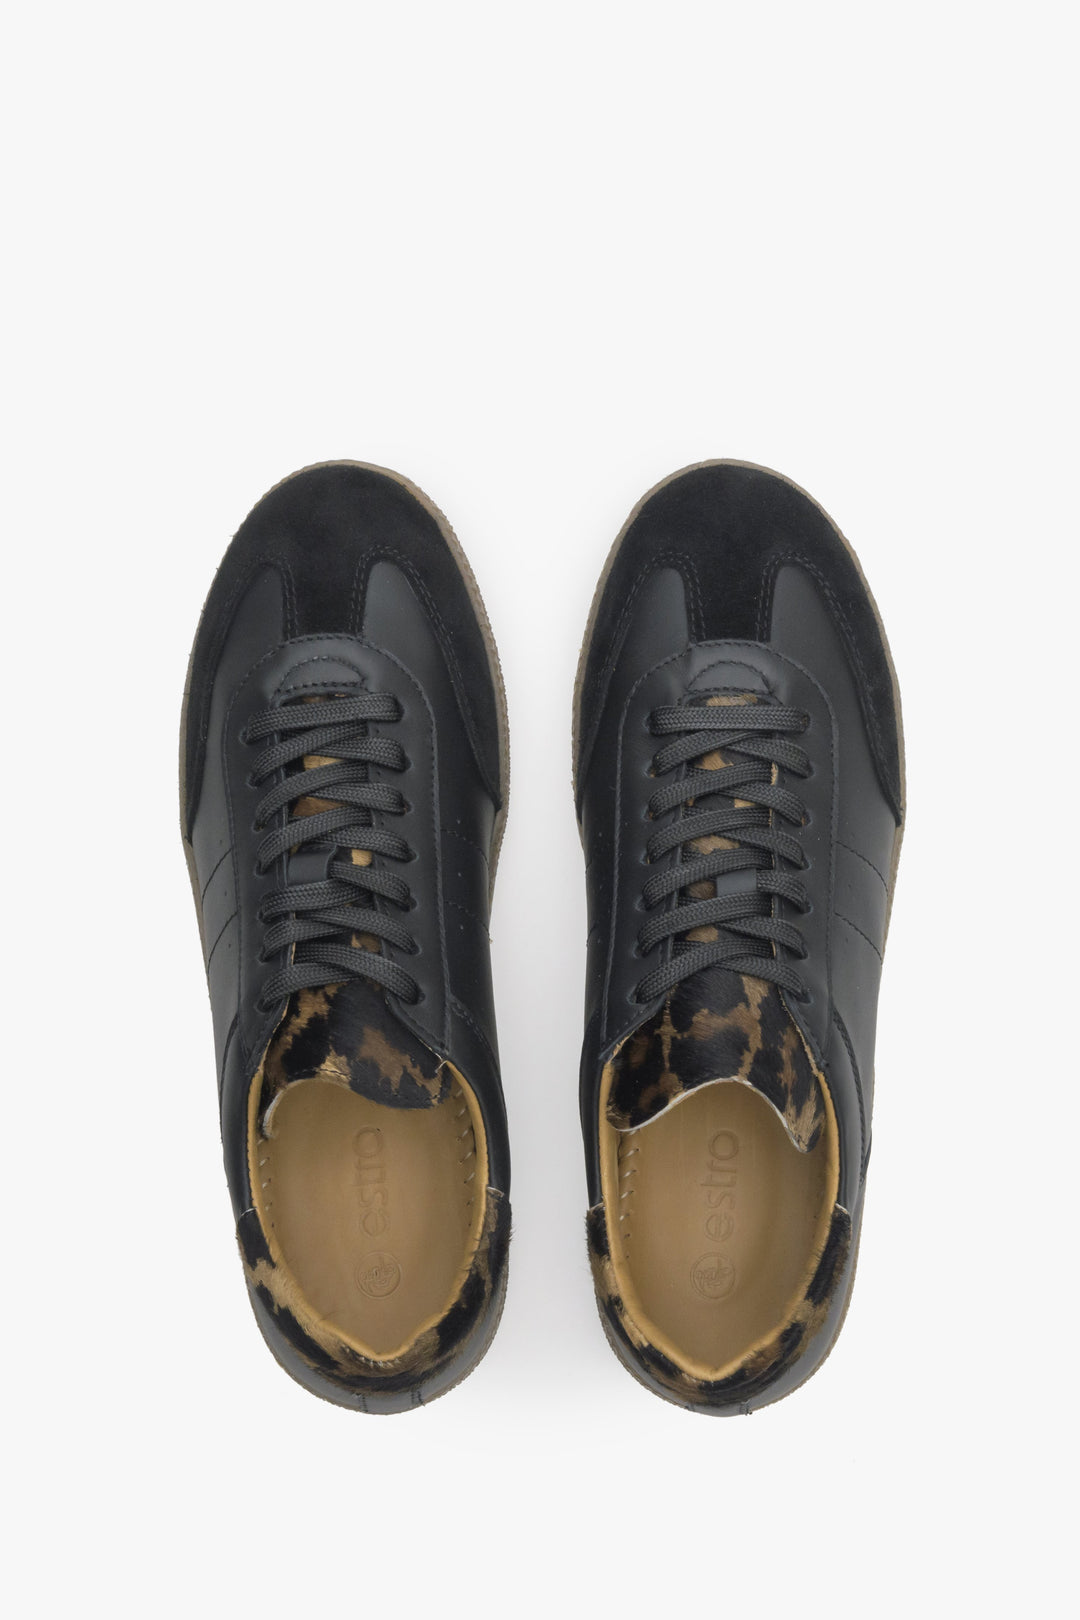 Estro leather women's black sneakers - model presentation from above.